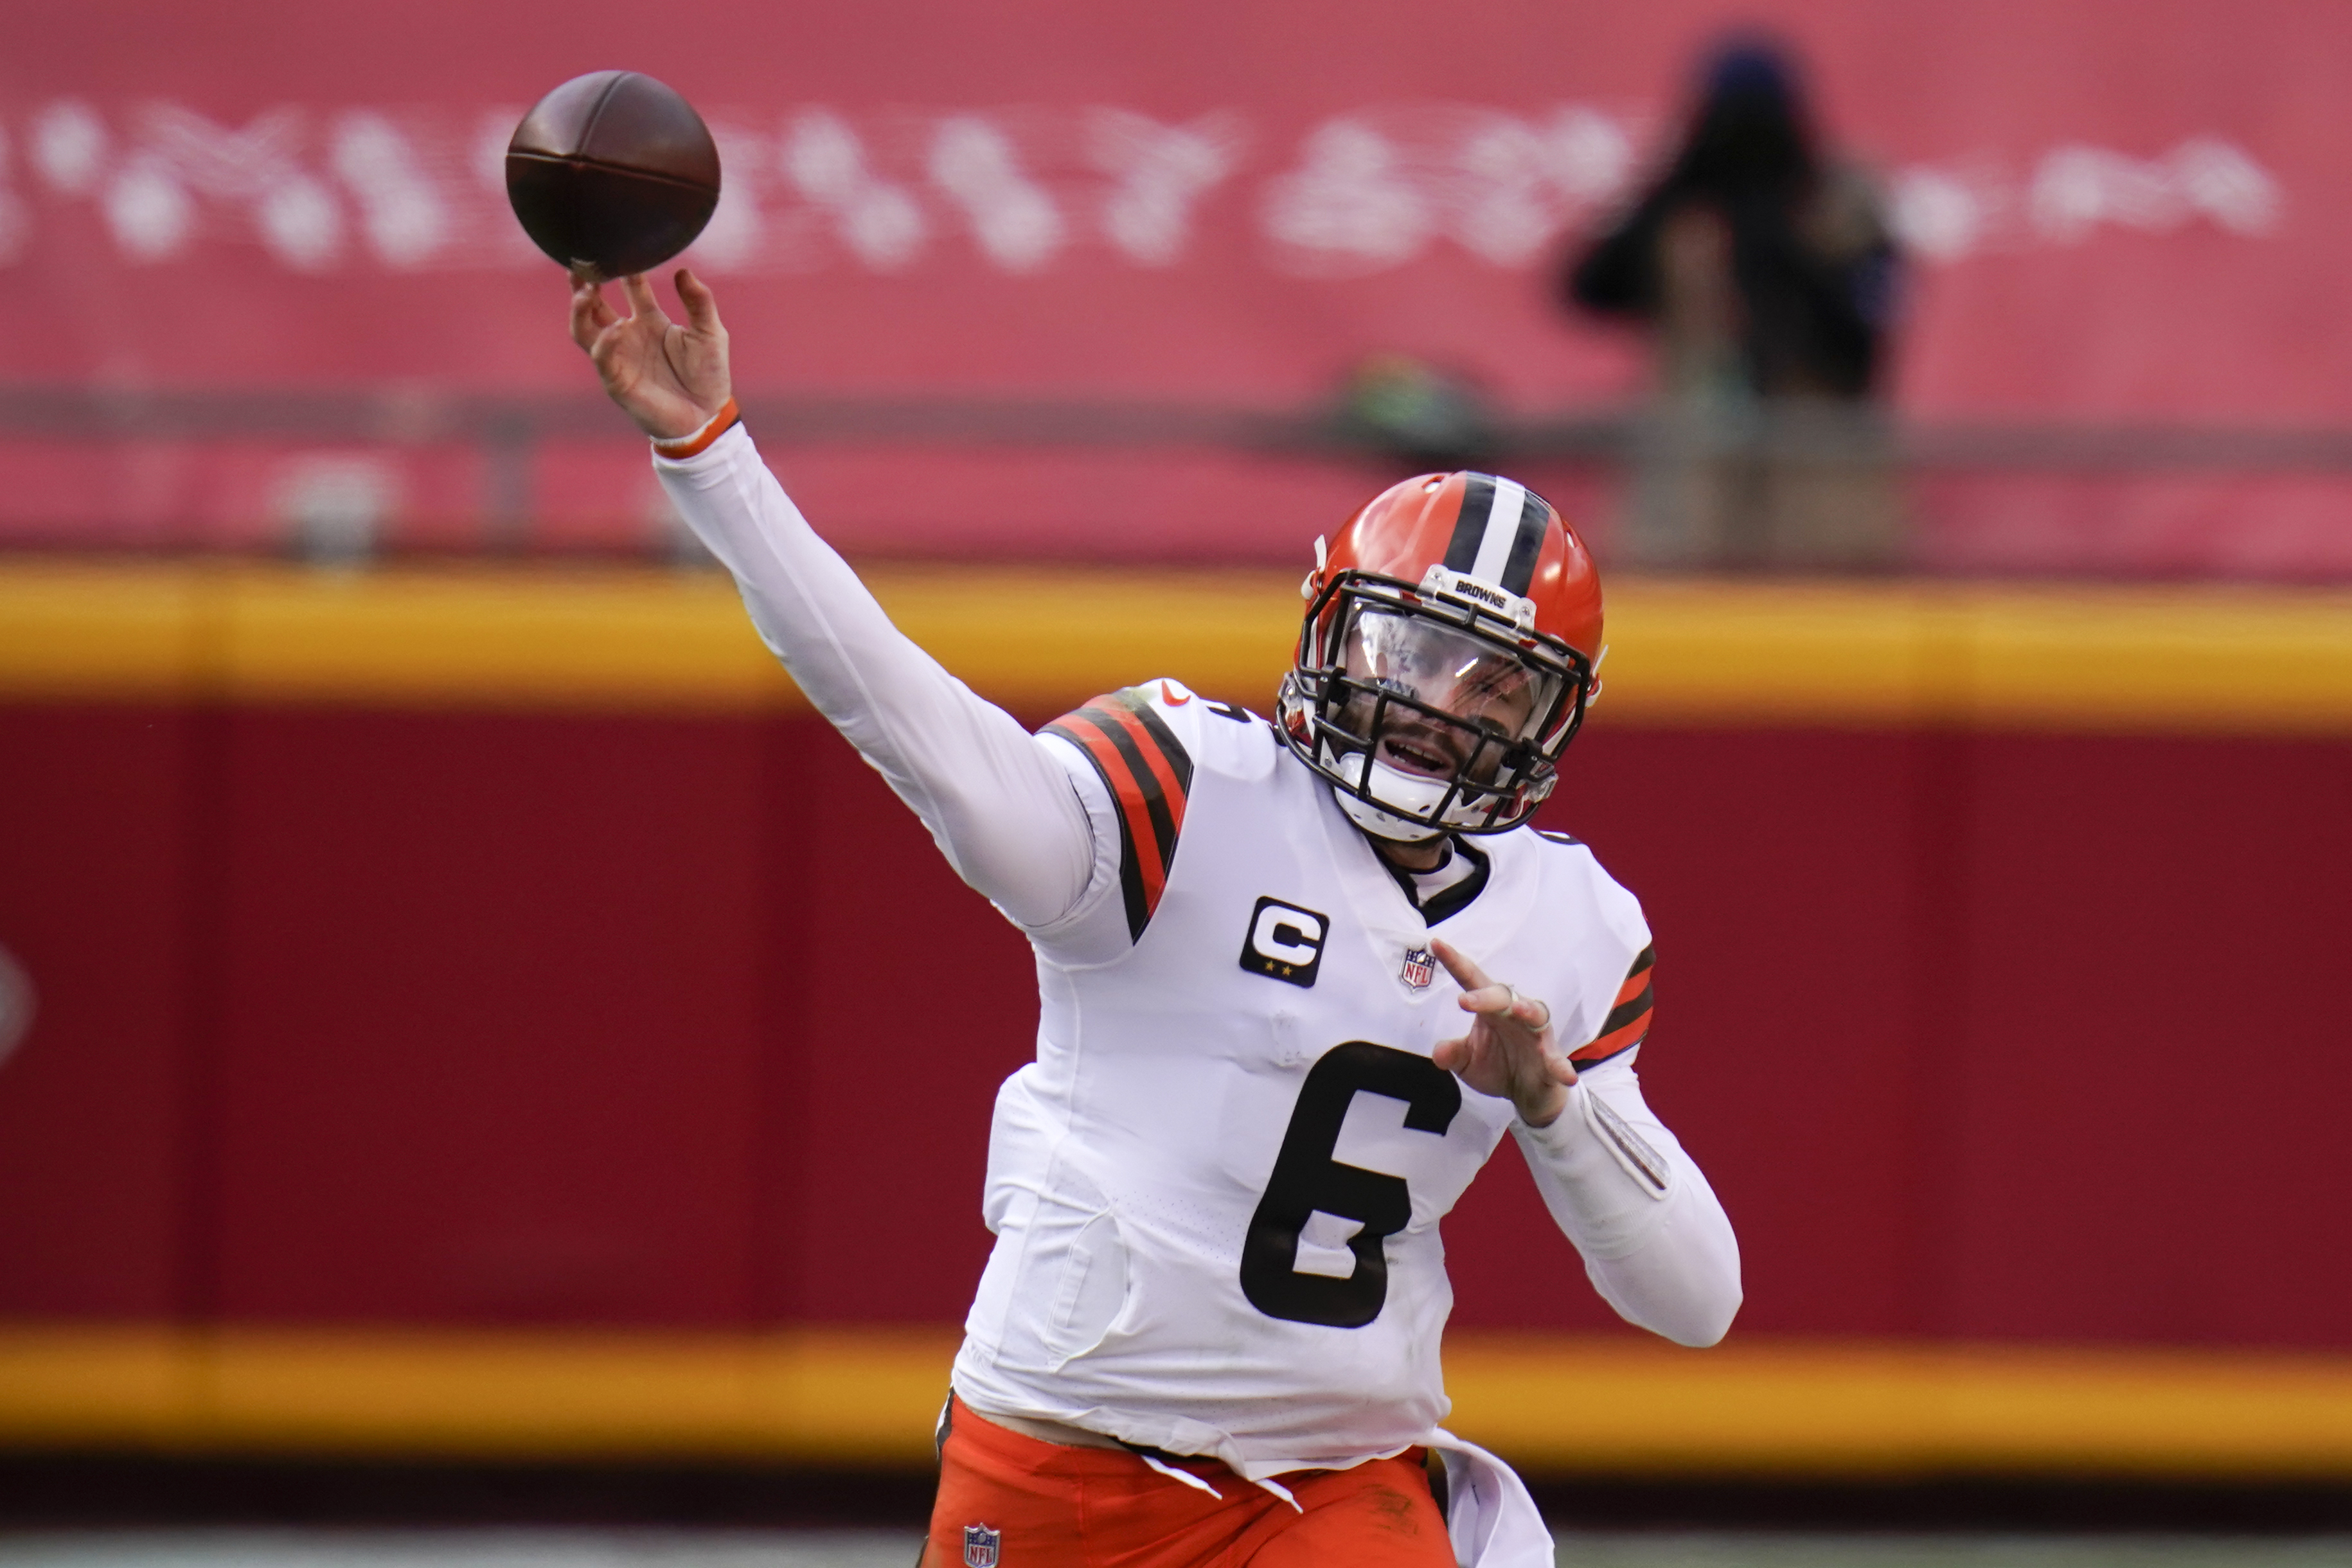 Browns vs. Chiefs live stream: TV channel, how to watch